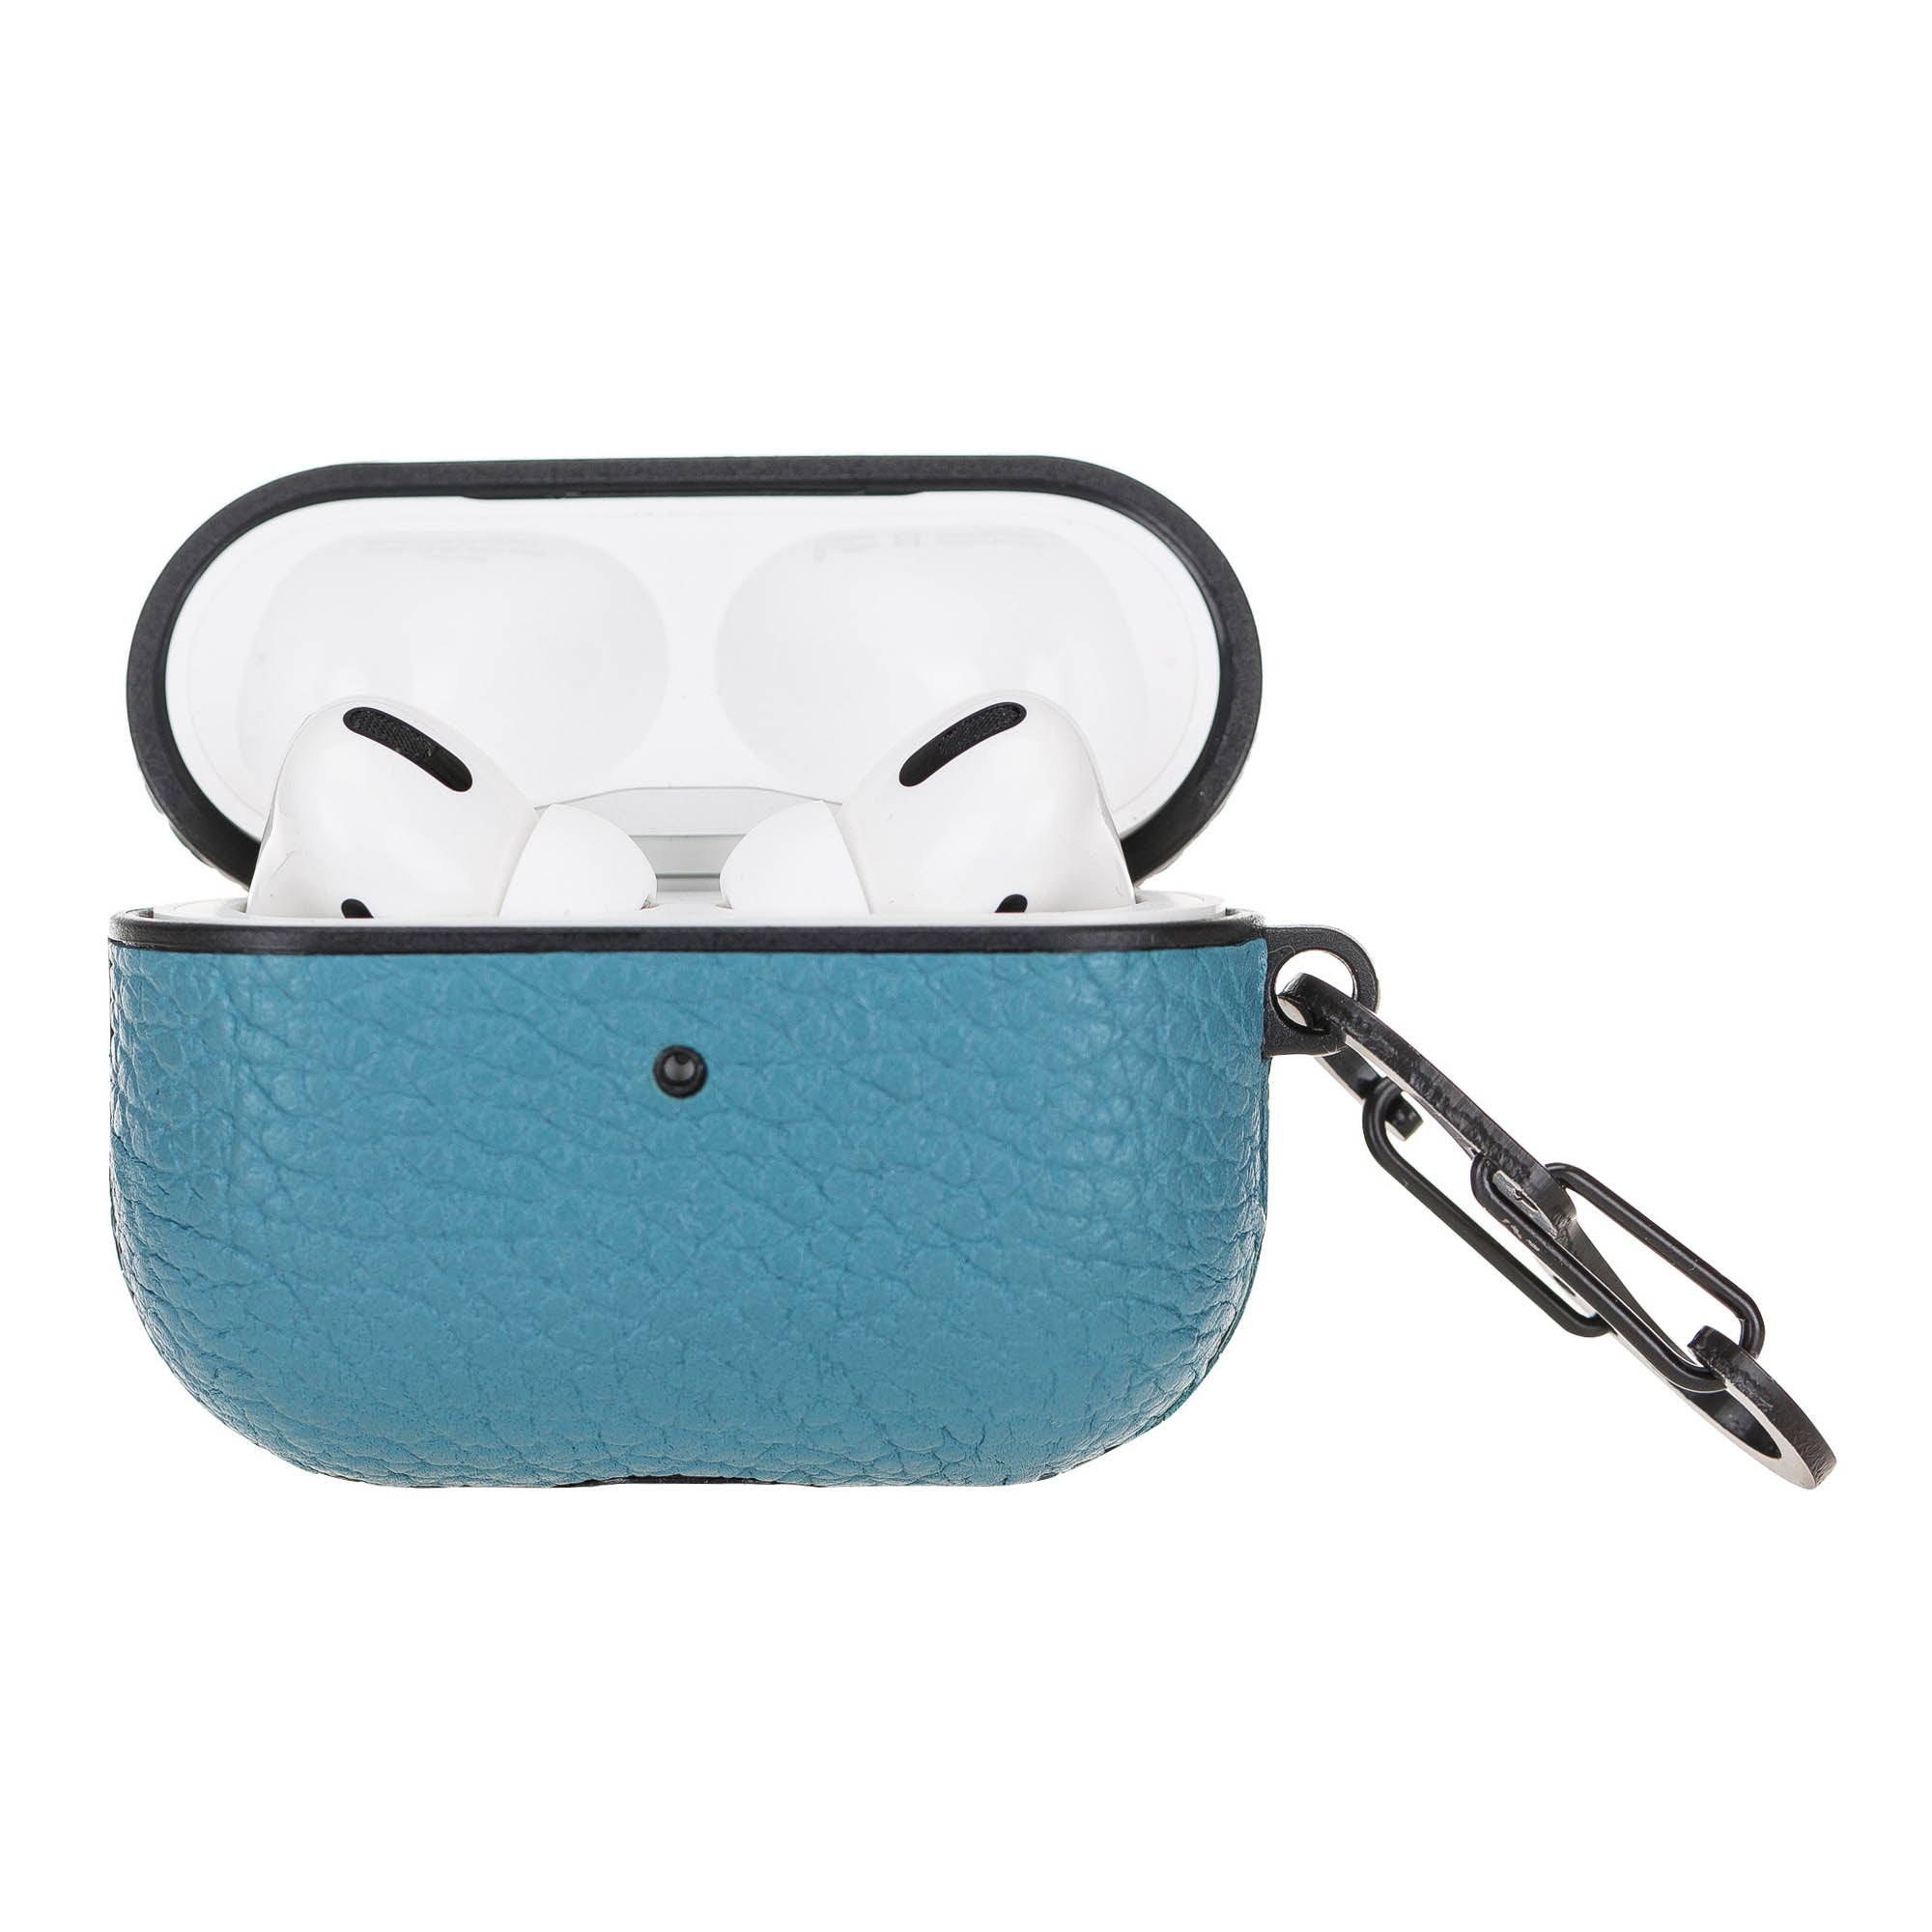 Juni Leather Capsule Case for AirPods Pro - TURQUOISE - saracleather